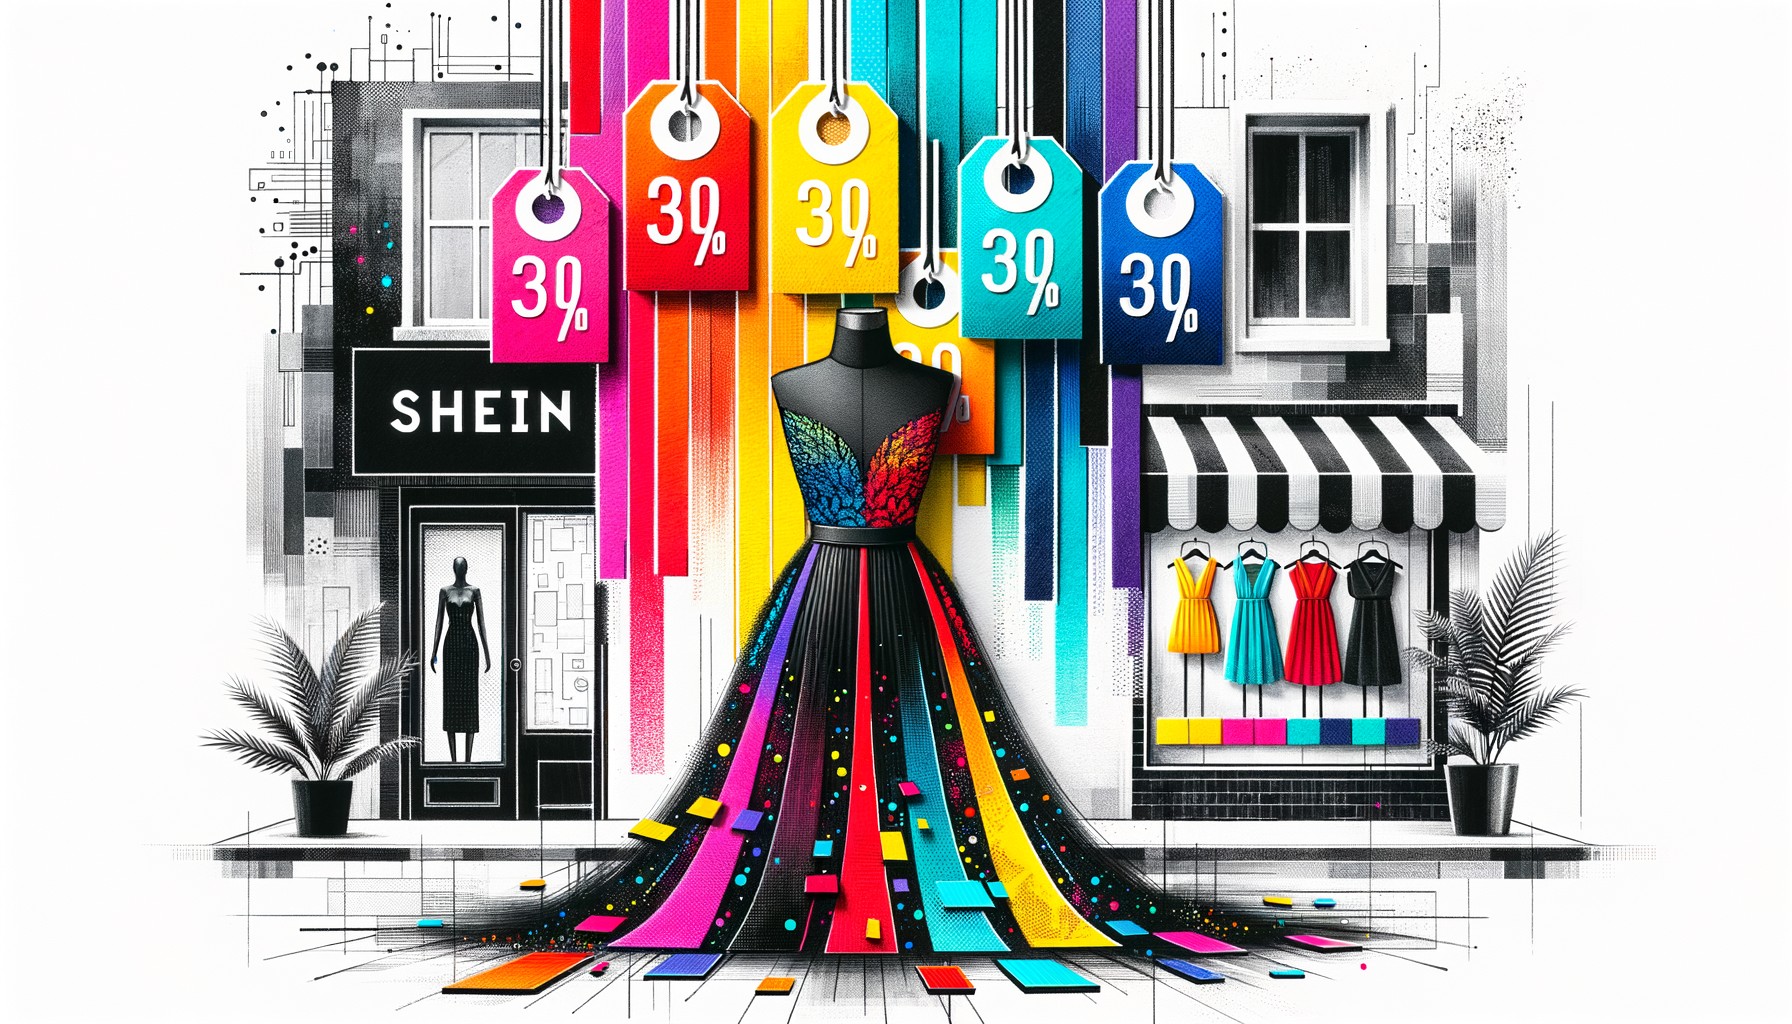 Shein's price hikes aim to improve its IPO prospects